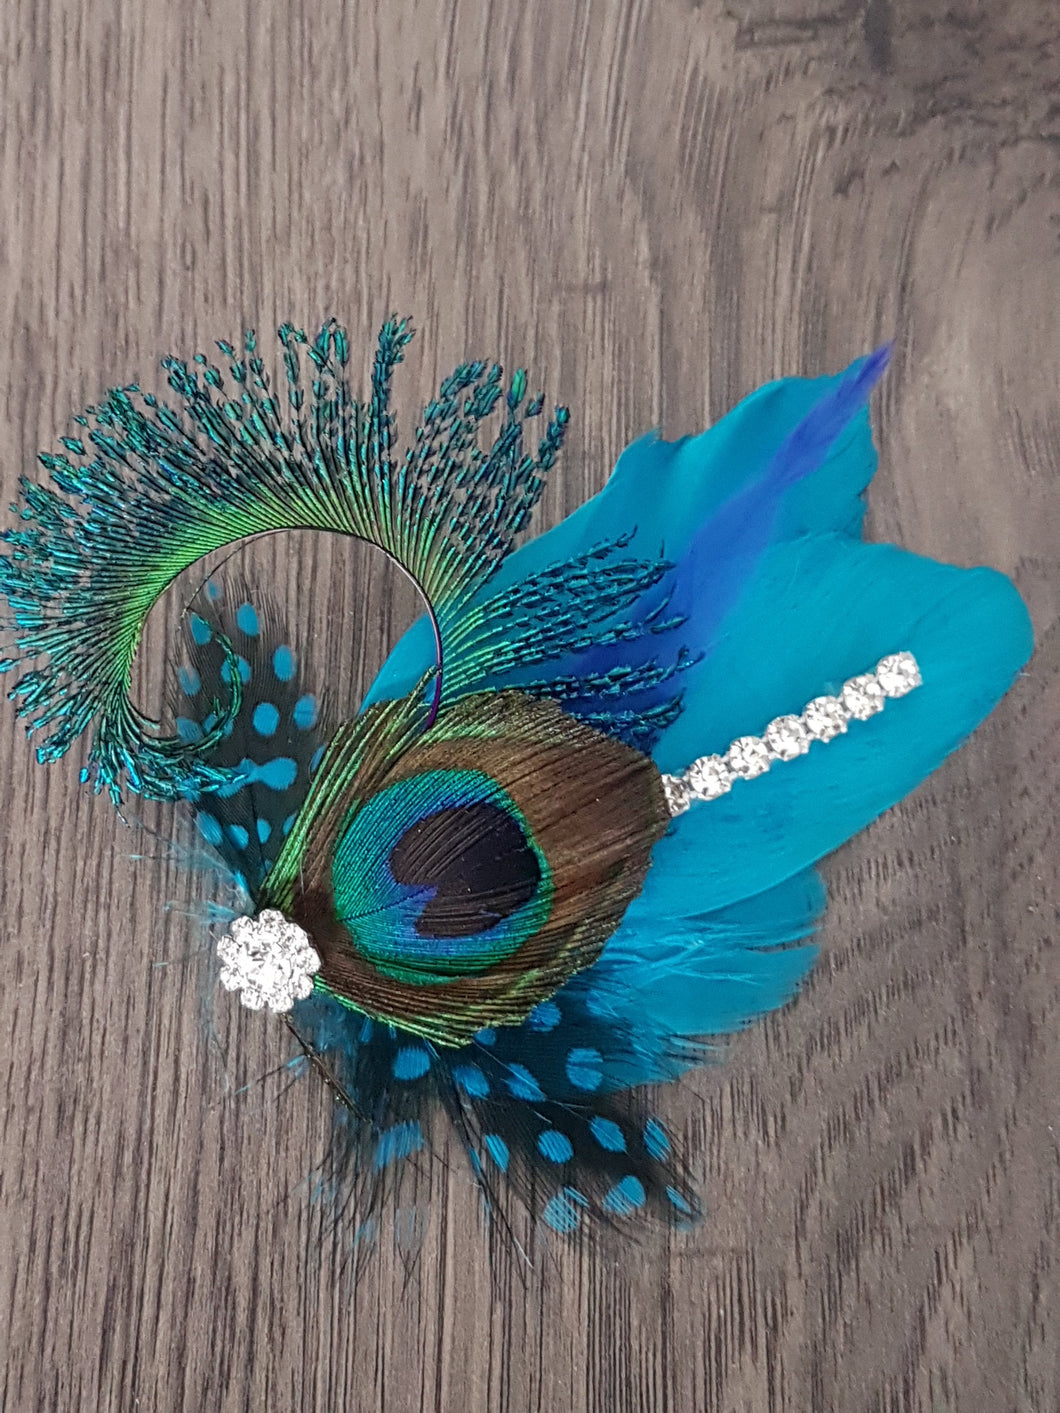 Peacock Sword Feather and Rhinestone  Buttonhole boutonniere,hair clip Wedding